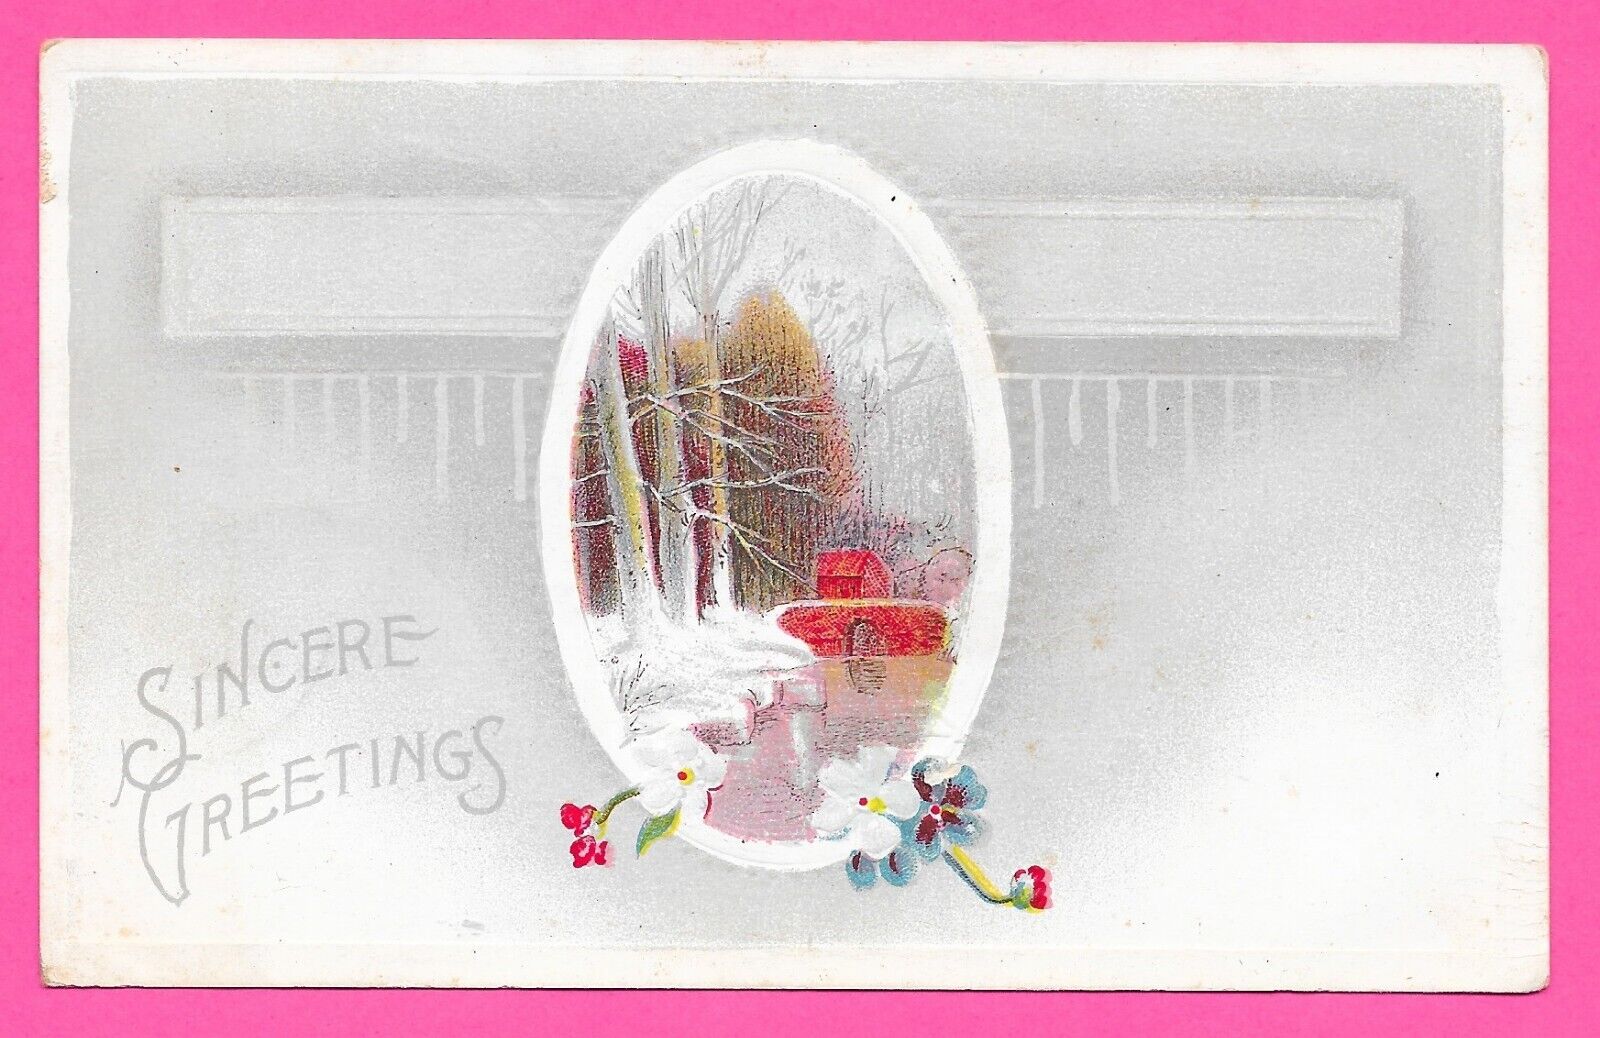 Sincere Greetings with Winter Scene - Posted 1911 Central SC - Post Card